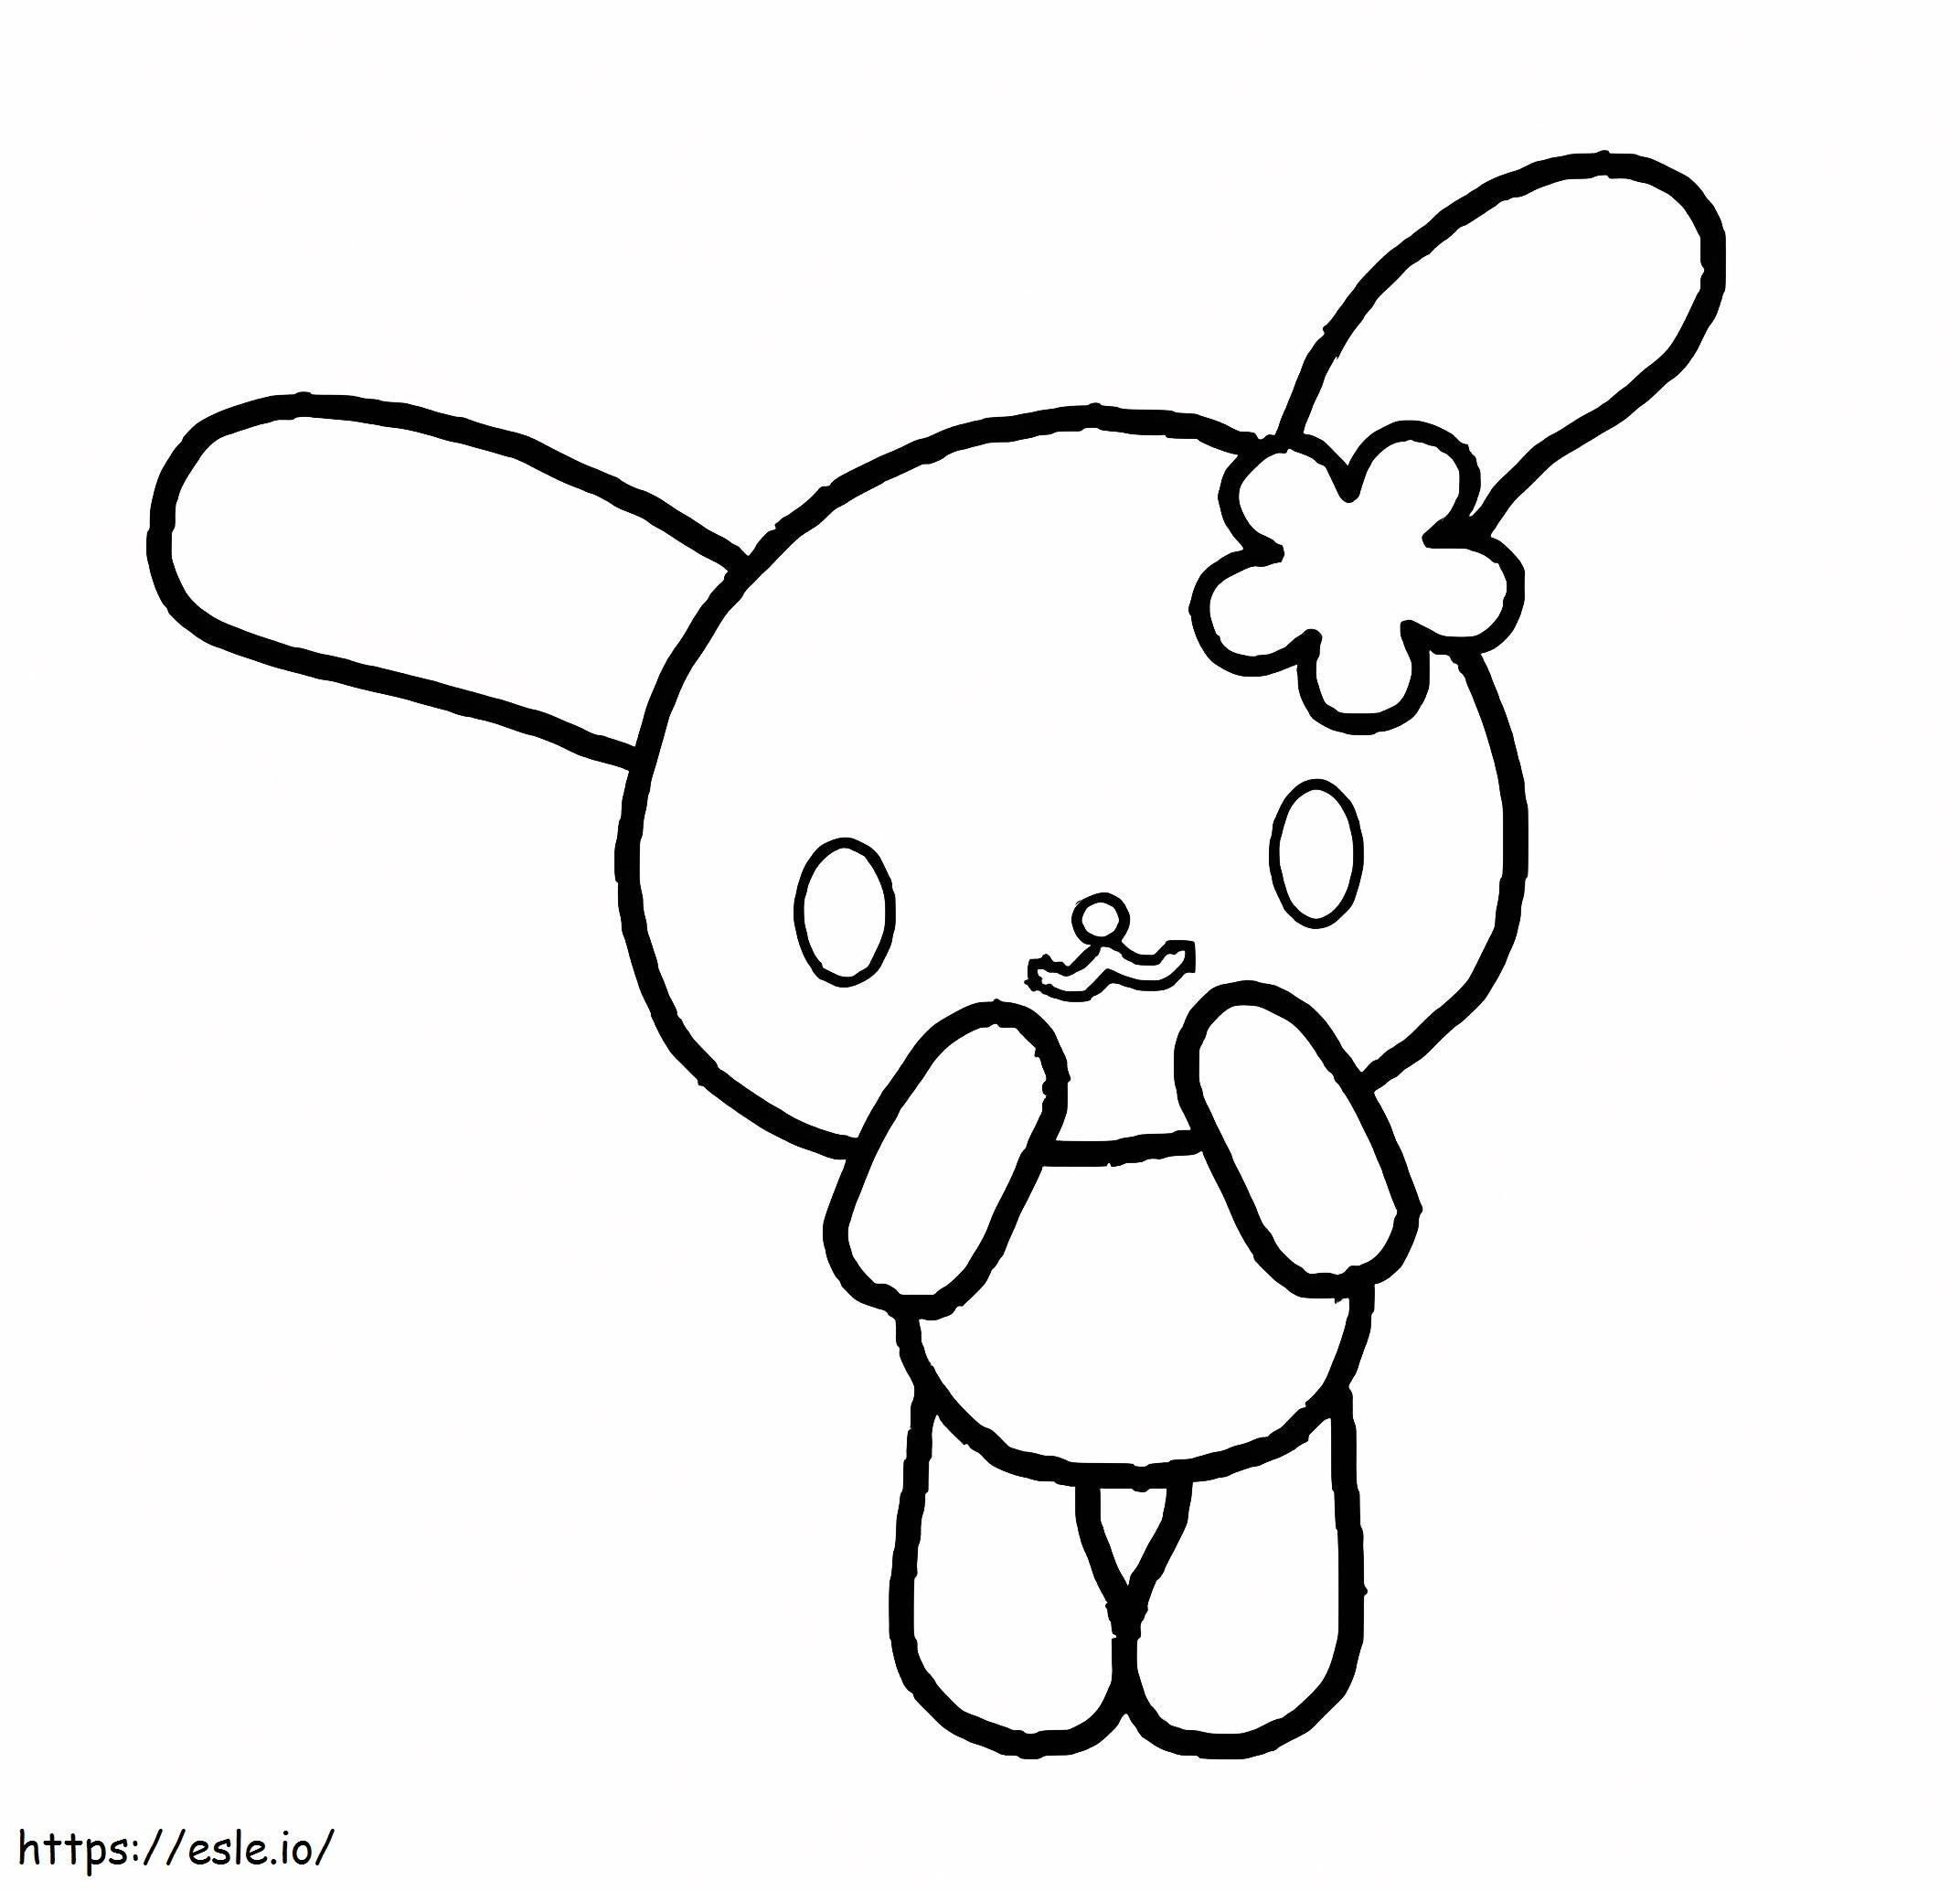 Sanrio Business coloring page